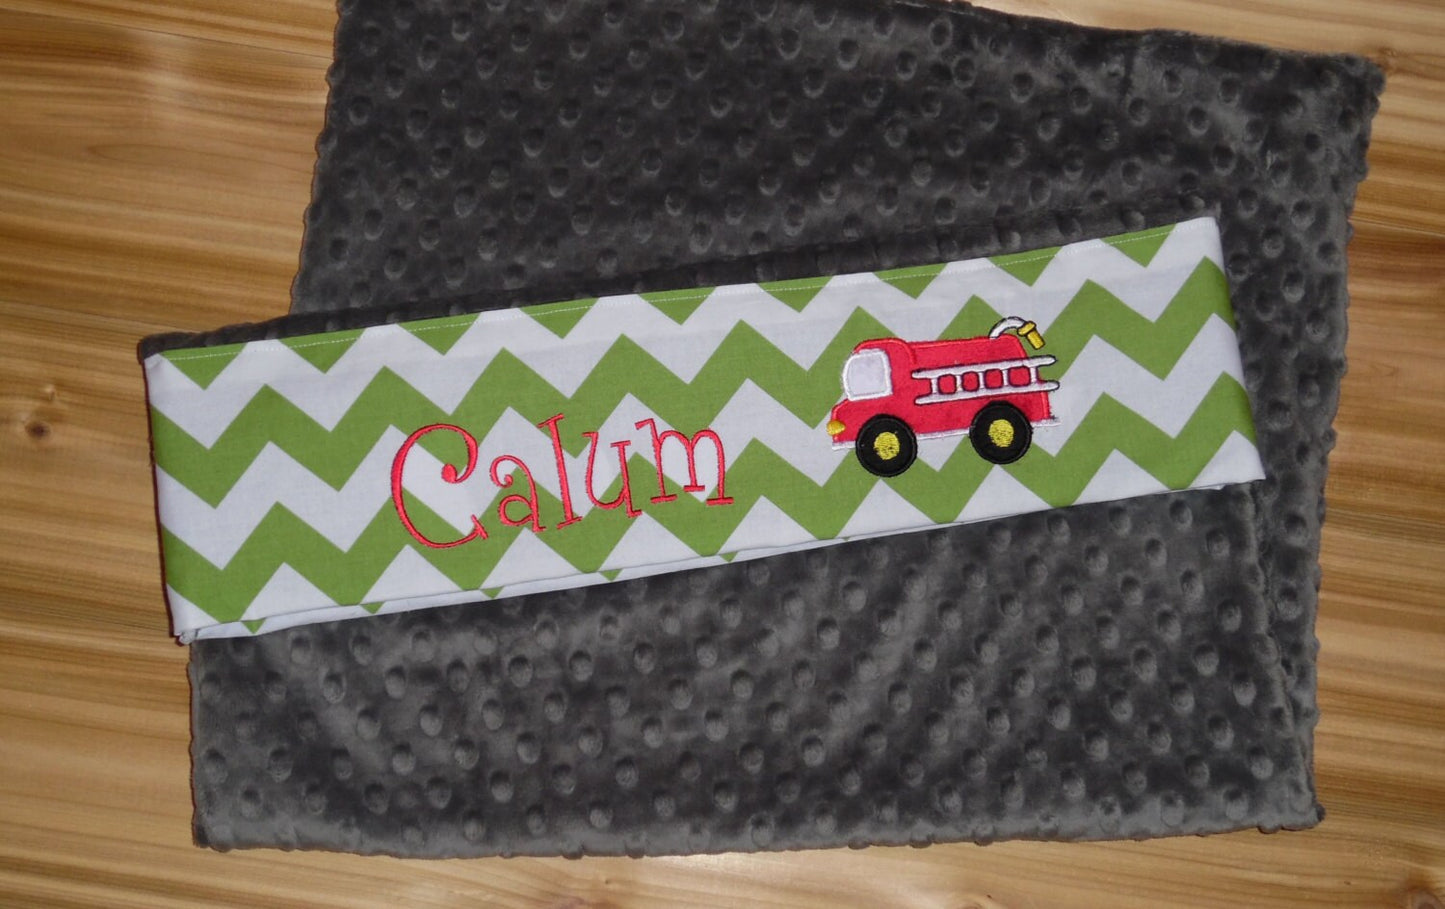 Pillowcase -Personalized Minky Pillowcase with Minky Firetruck - Green and Grey